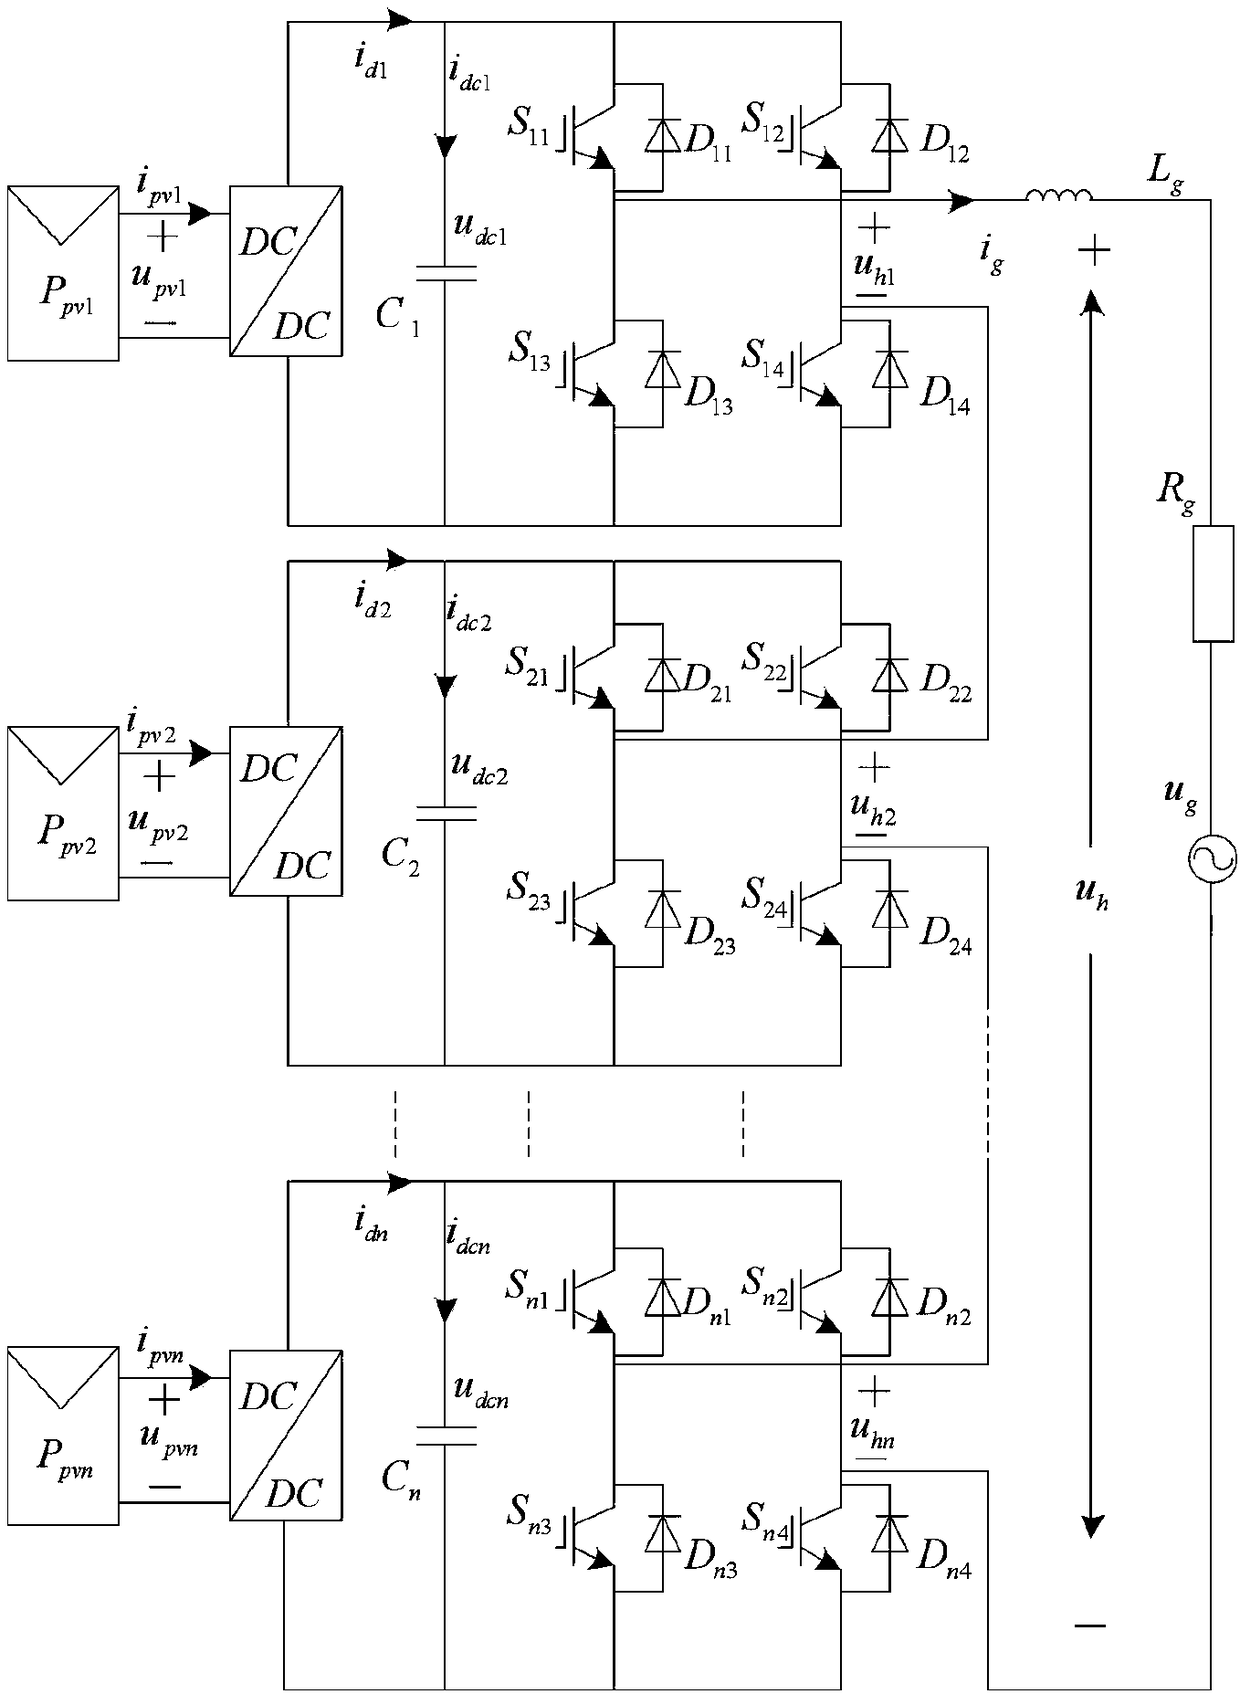 Voltage equalizing control method for cascaded two-stage inverter